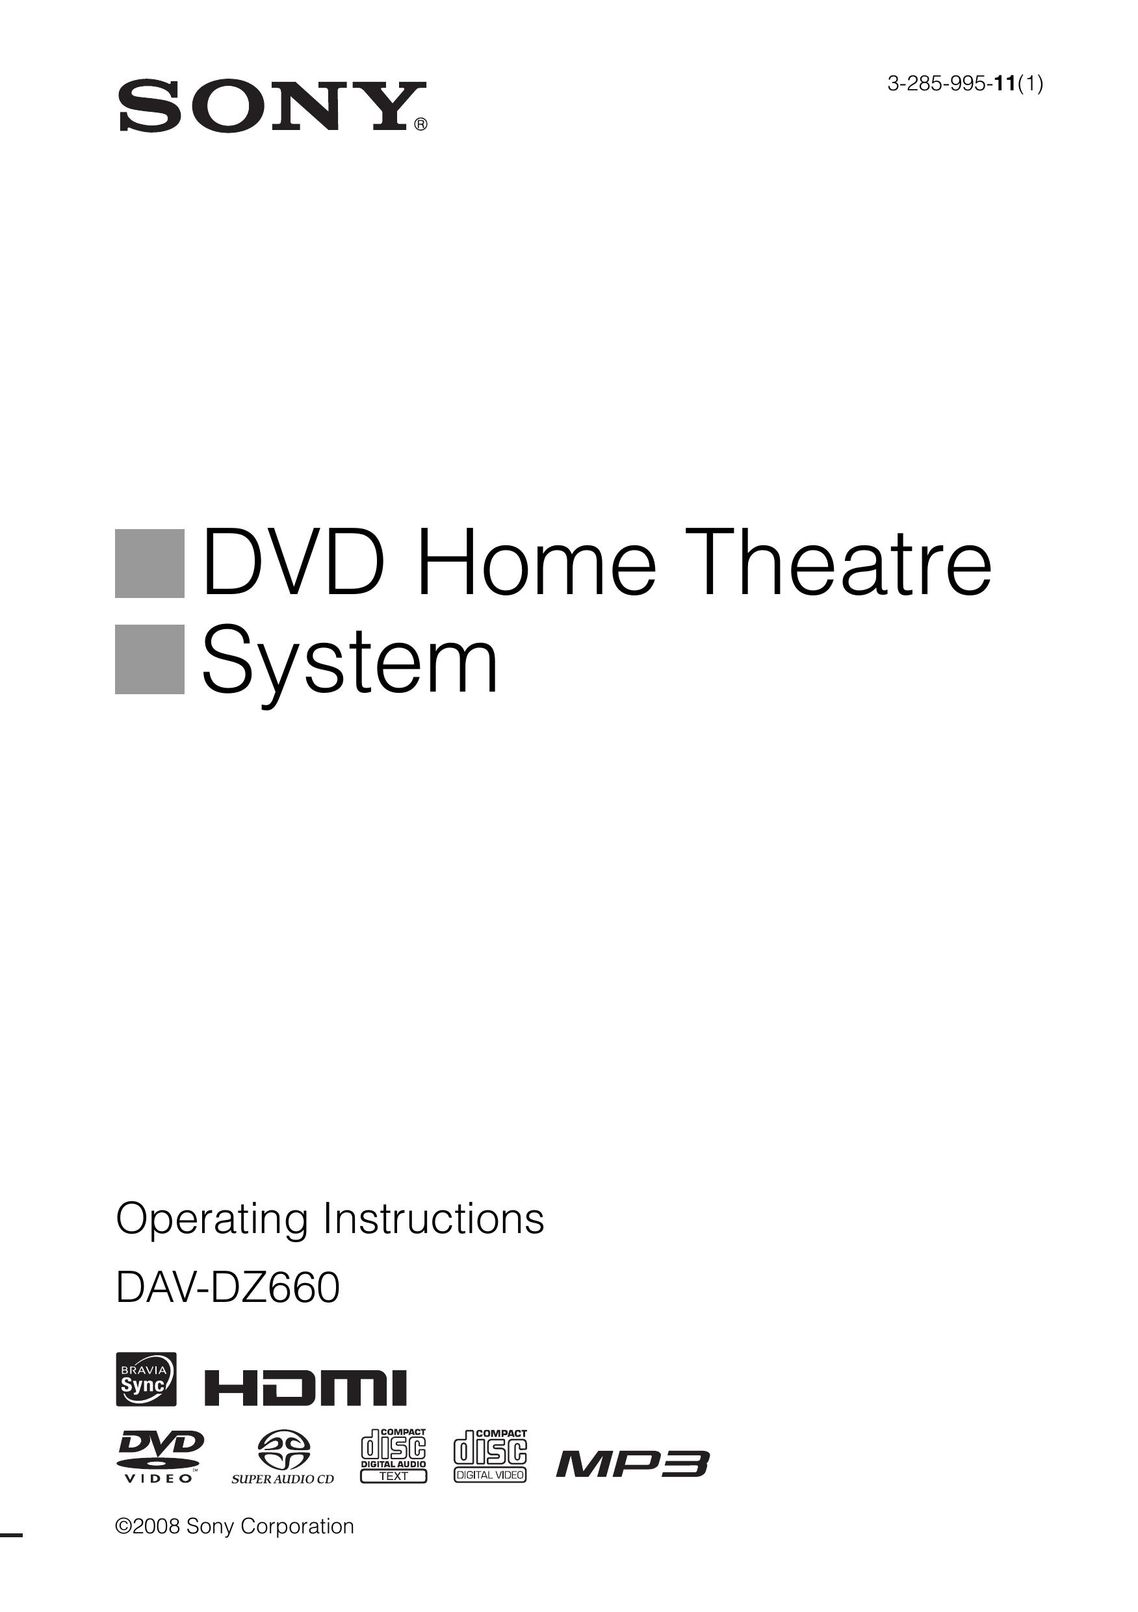 Sony 3-285-995-11(1) Home Theater System User Manual